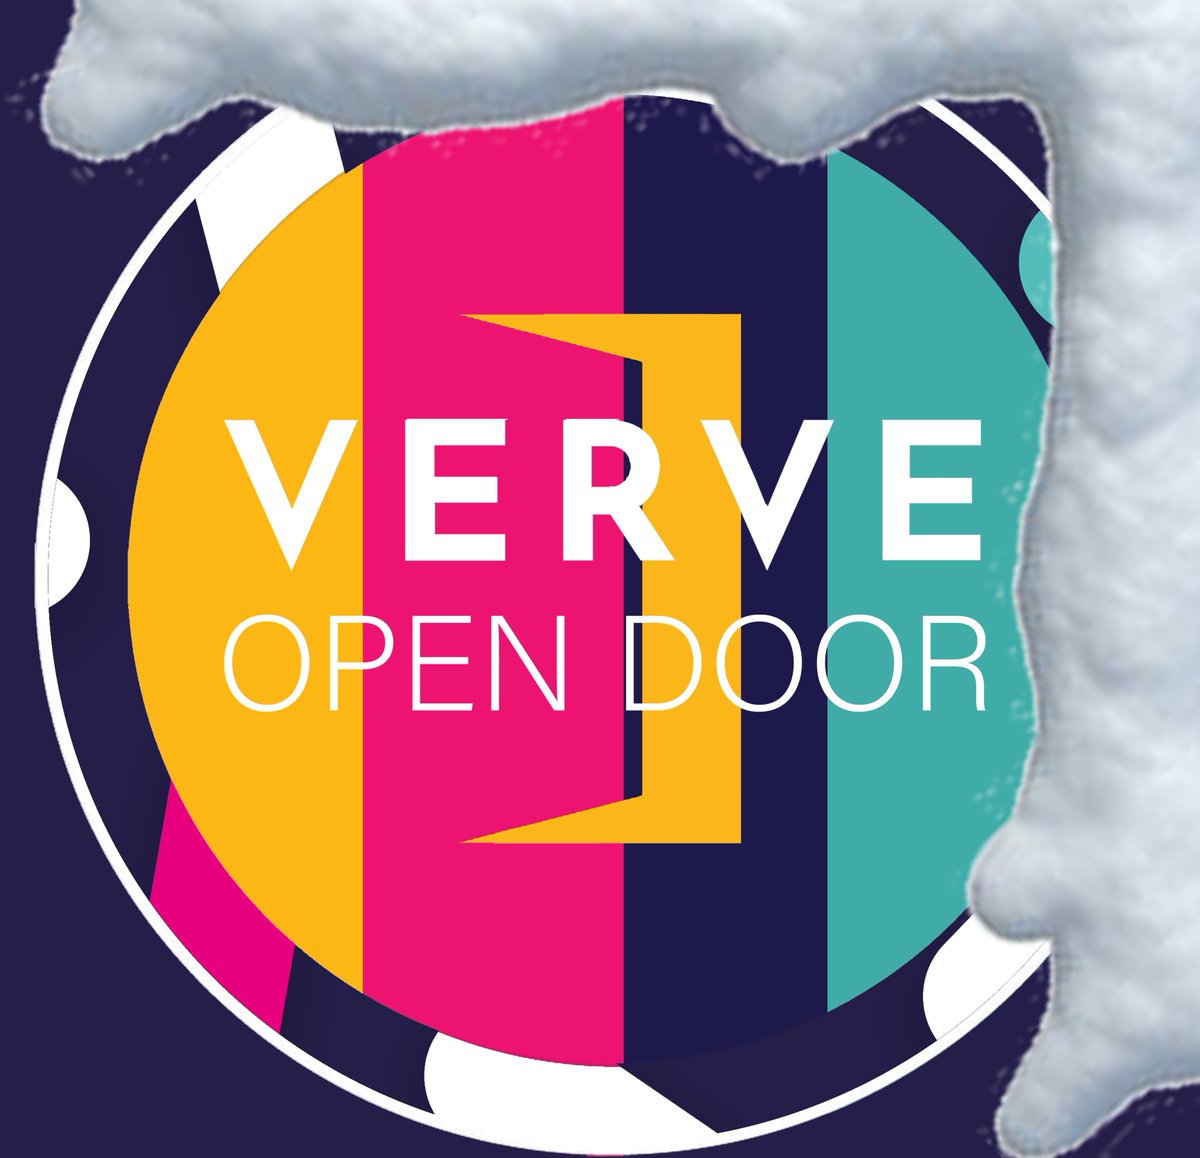 .#VERVEOpenDoor [where new poets are born] is back this Tuesday (16 Jan) for a wintery chilly blustery open mic only night @TheHiveJQ and we'd LOVE to see you! Pay as you feel - arrive from 6.45 to sign up, 7.30pm start! For more info, go here➡️tinyurl.com/3ehjdehw